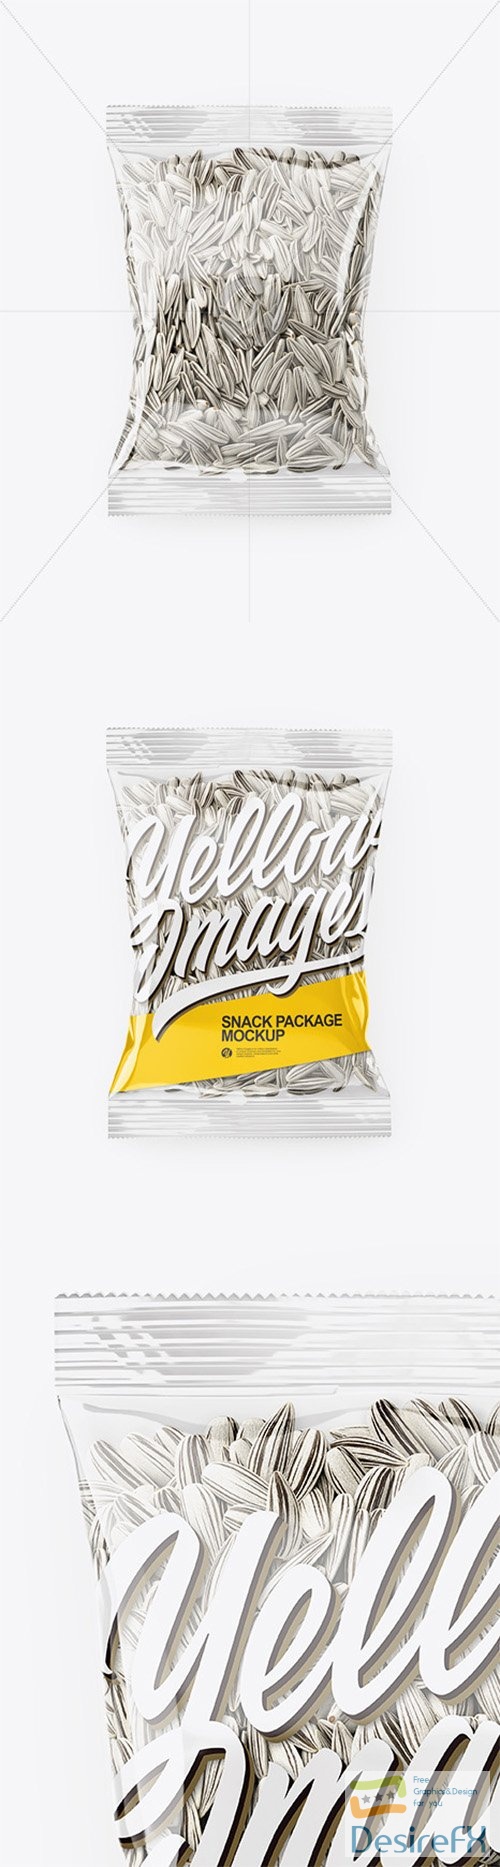 Clear Transparent Plastic Pack with White Sunflower Seeds Mockup - Top View 65863 TIF